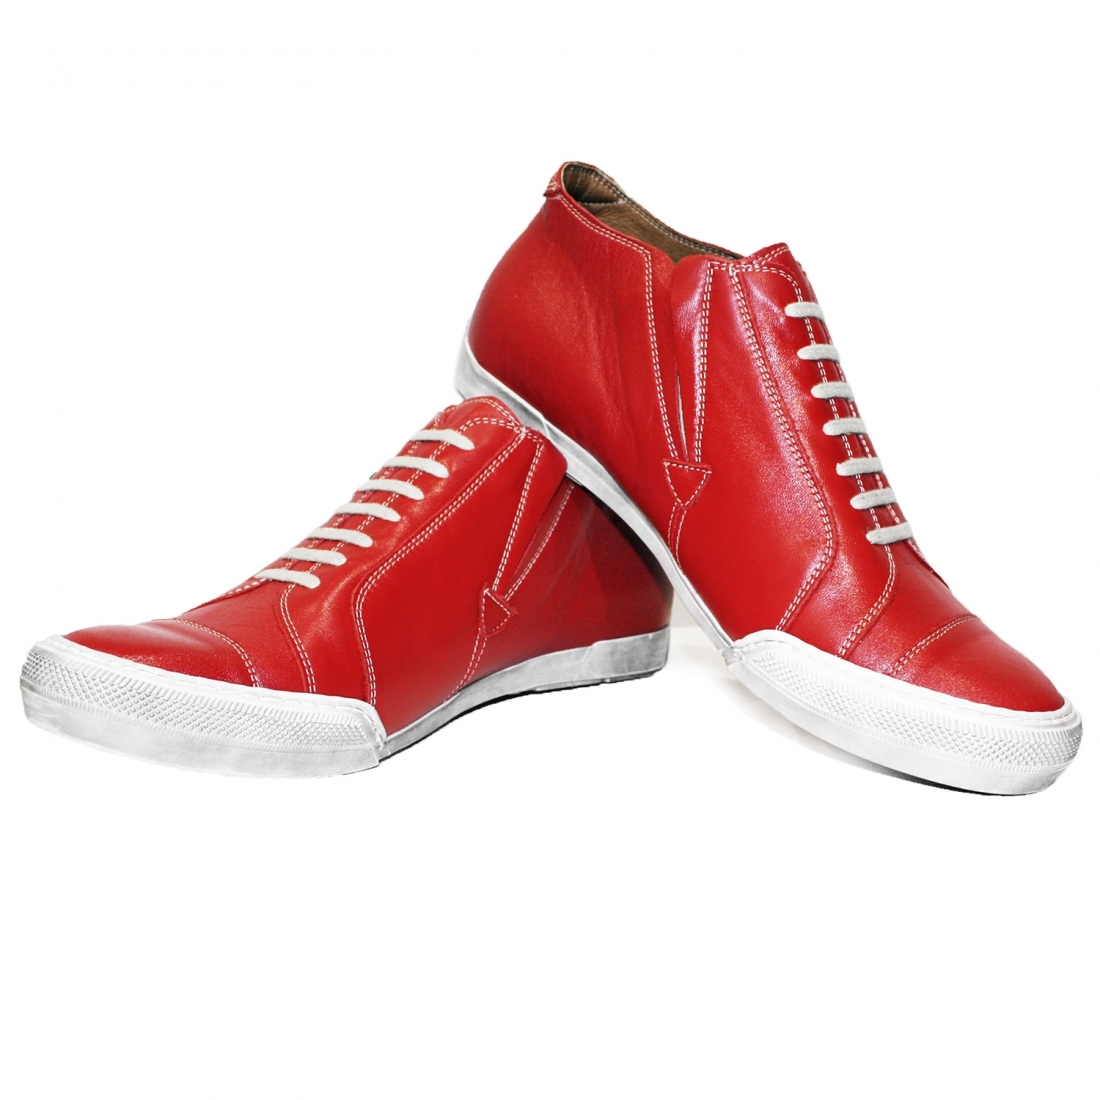 Modello Rednoise - Buty Casual - Handmade Colorful Italian Leather Shoes